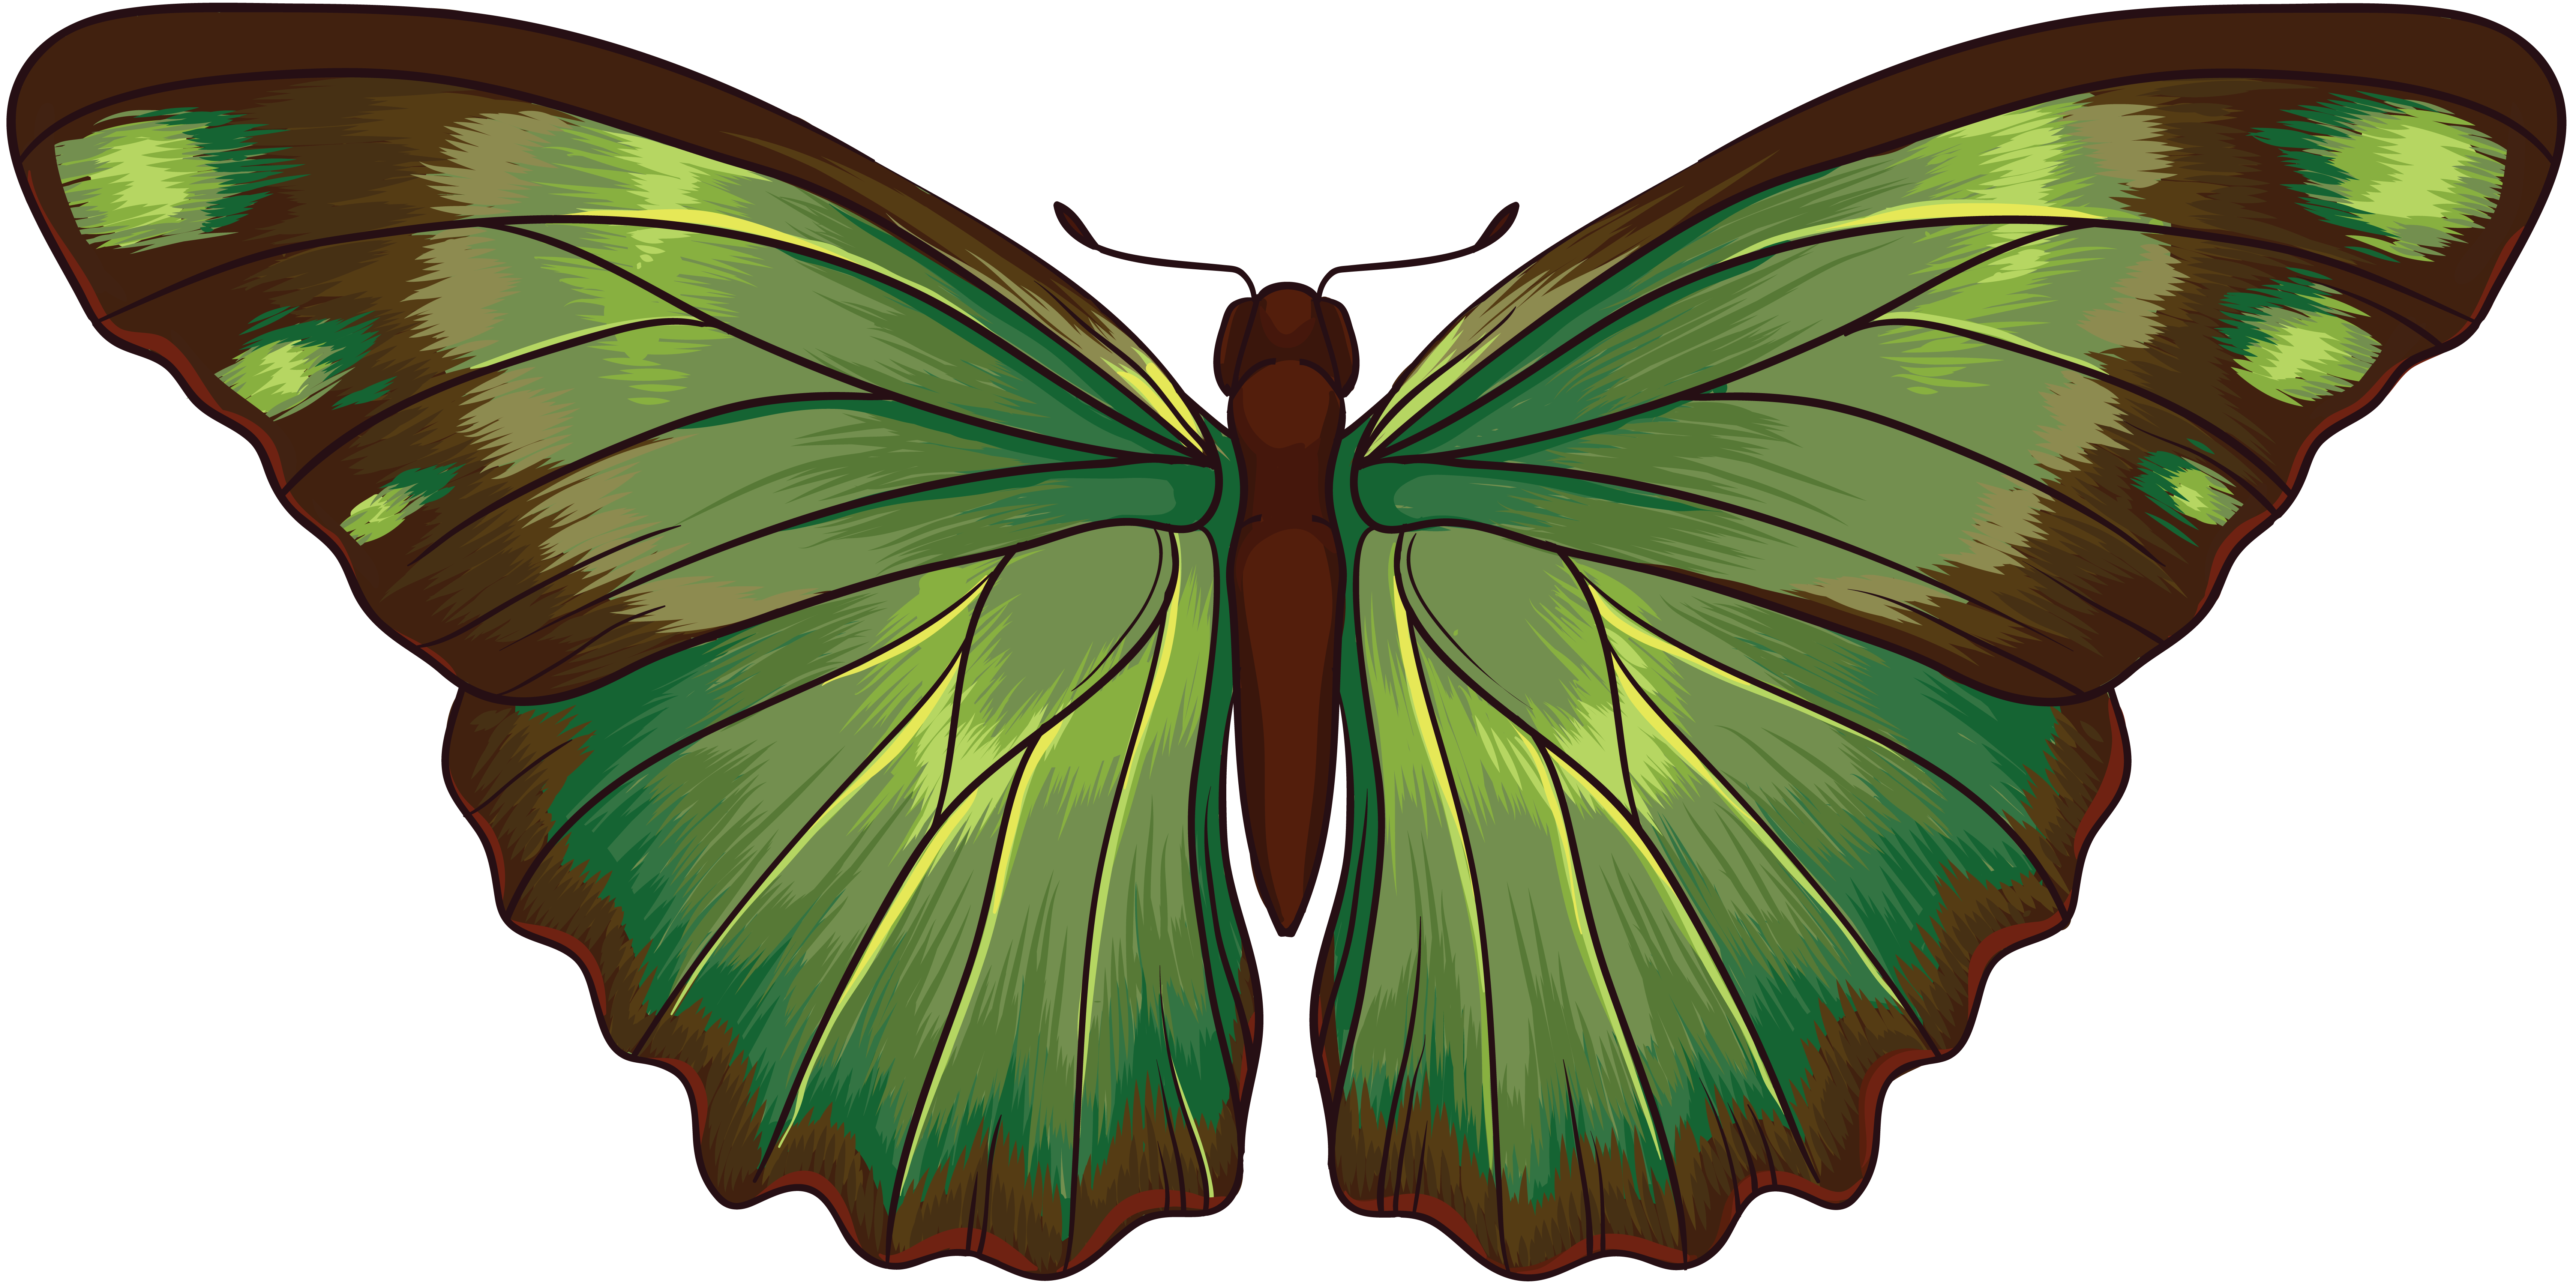 green butterfly PNG